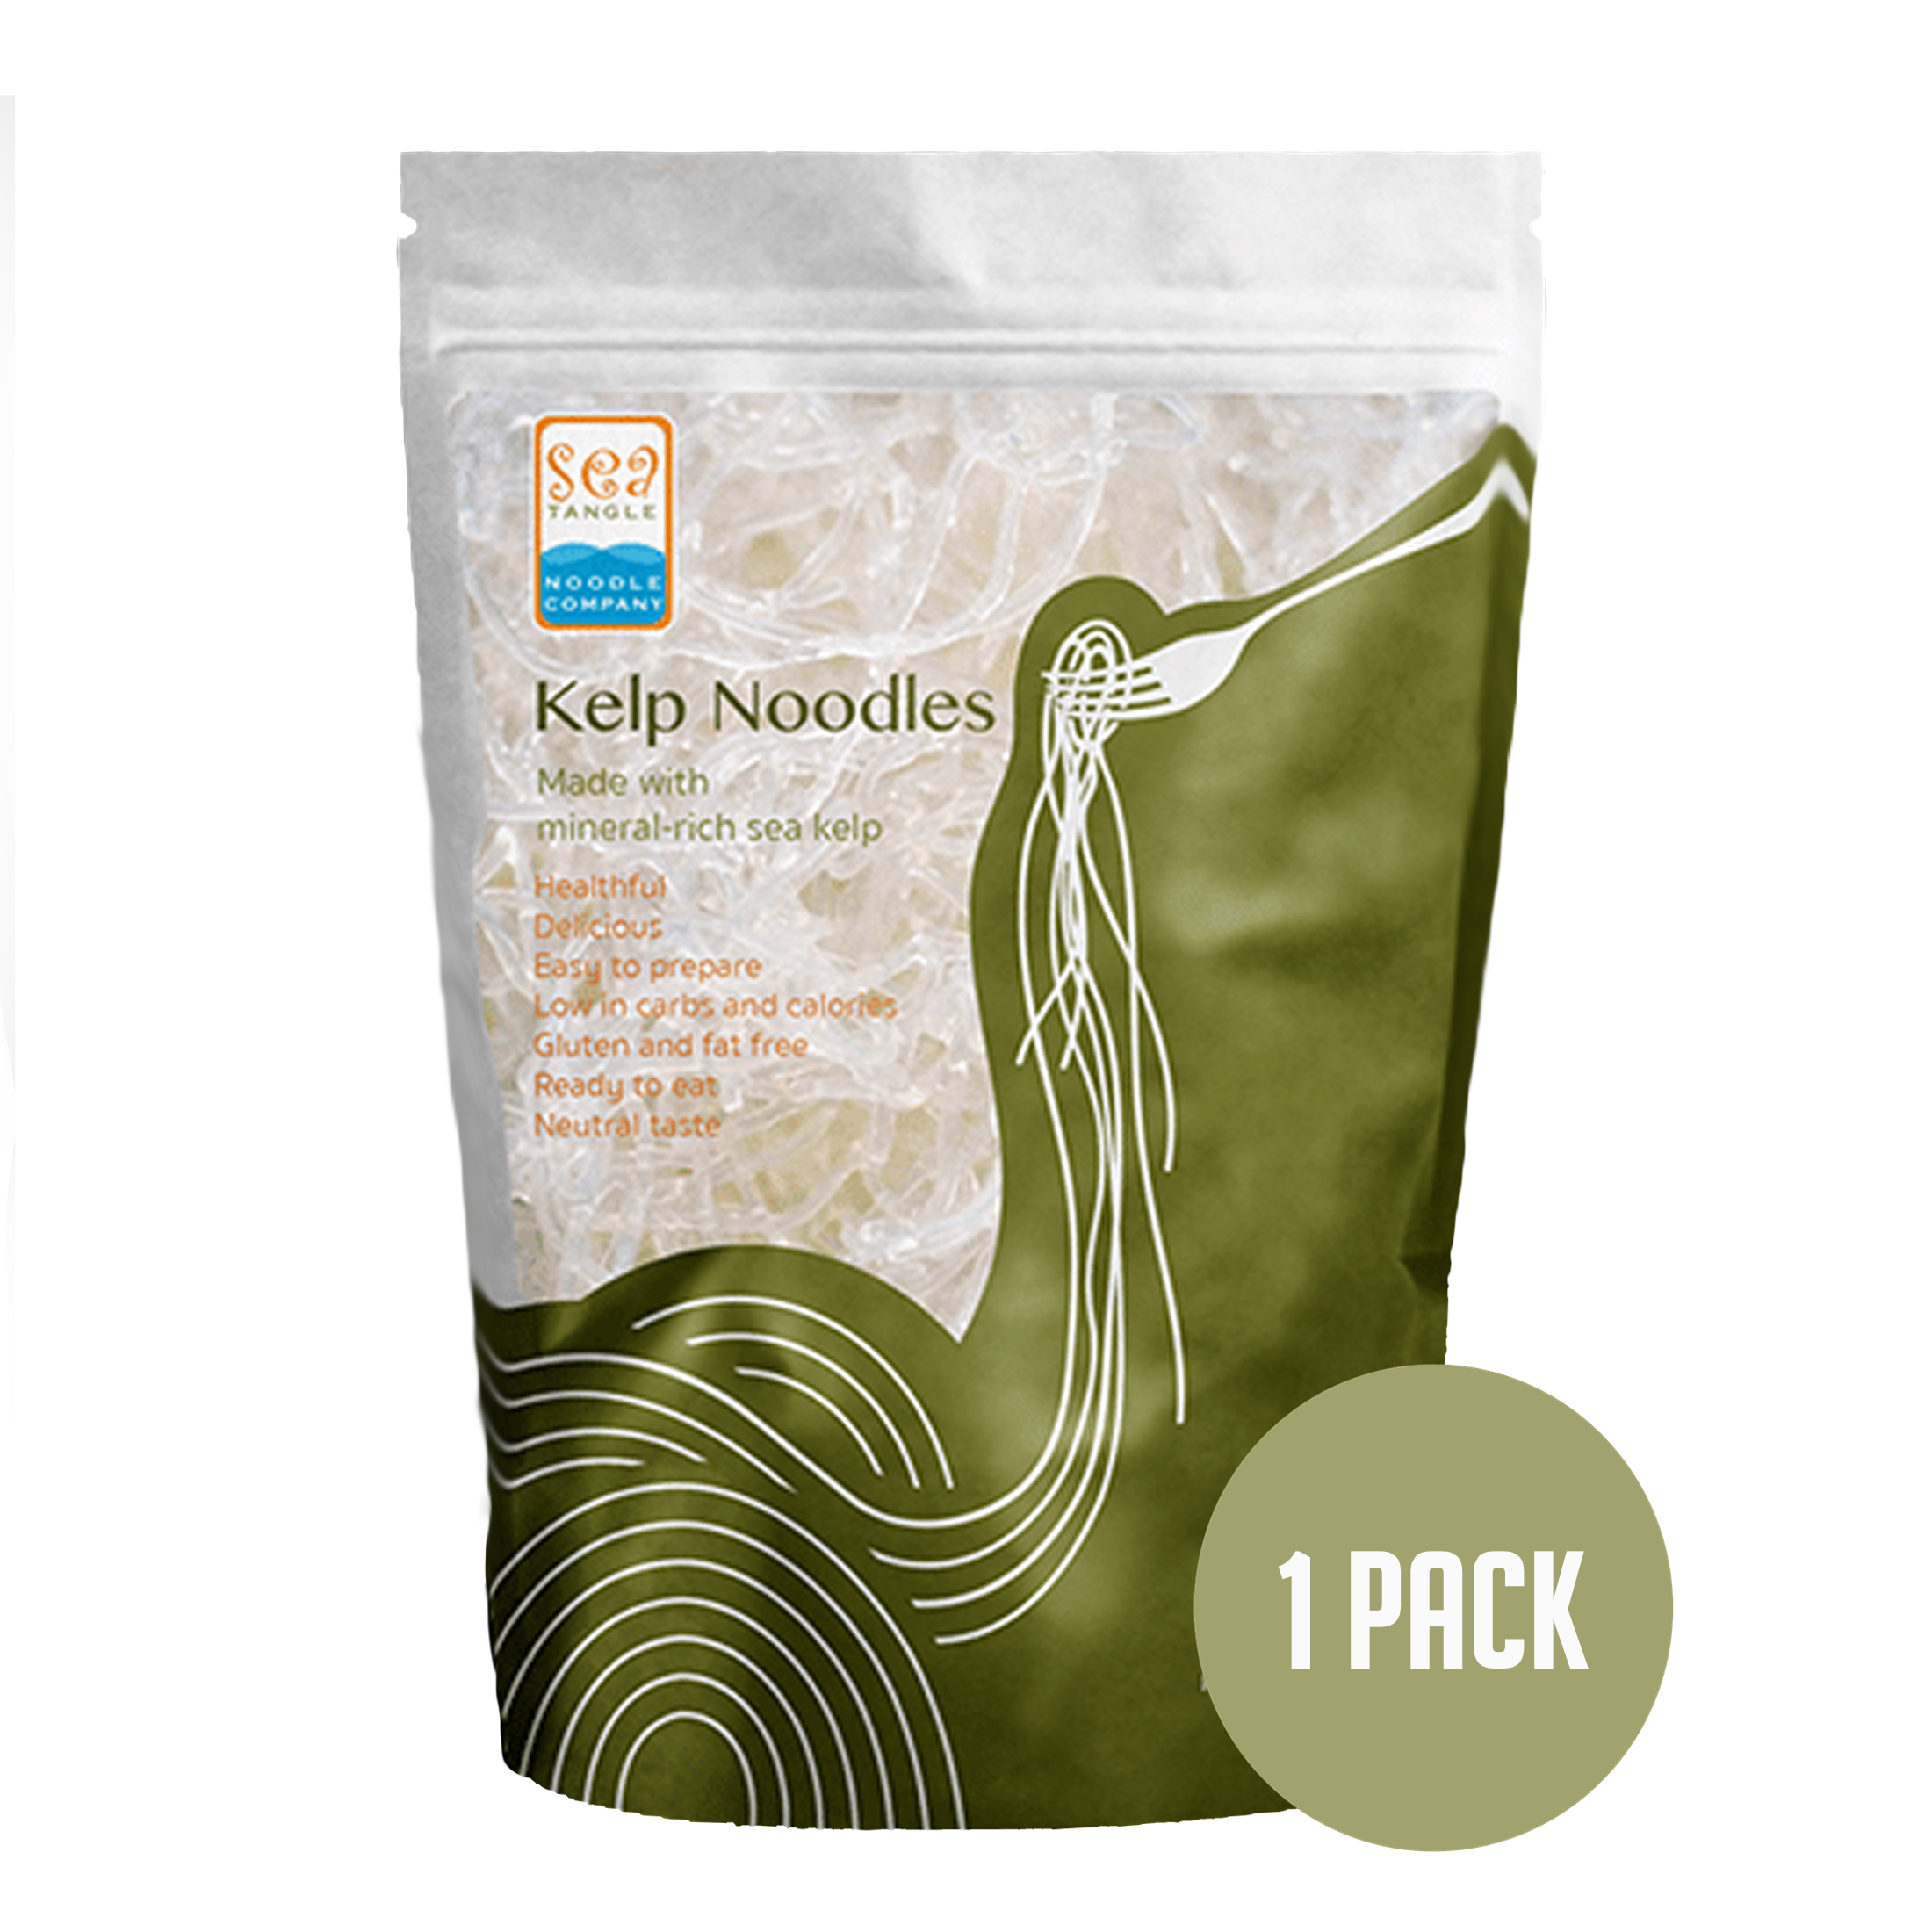 Kelp Noodles by Sea Tangle Noodle Company Size: One Pack - image 1 of 6